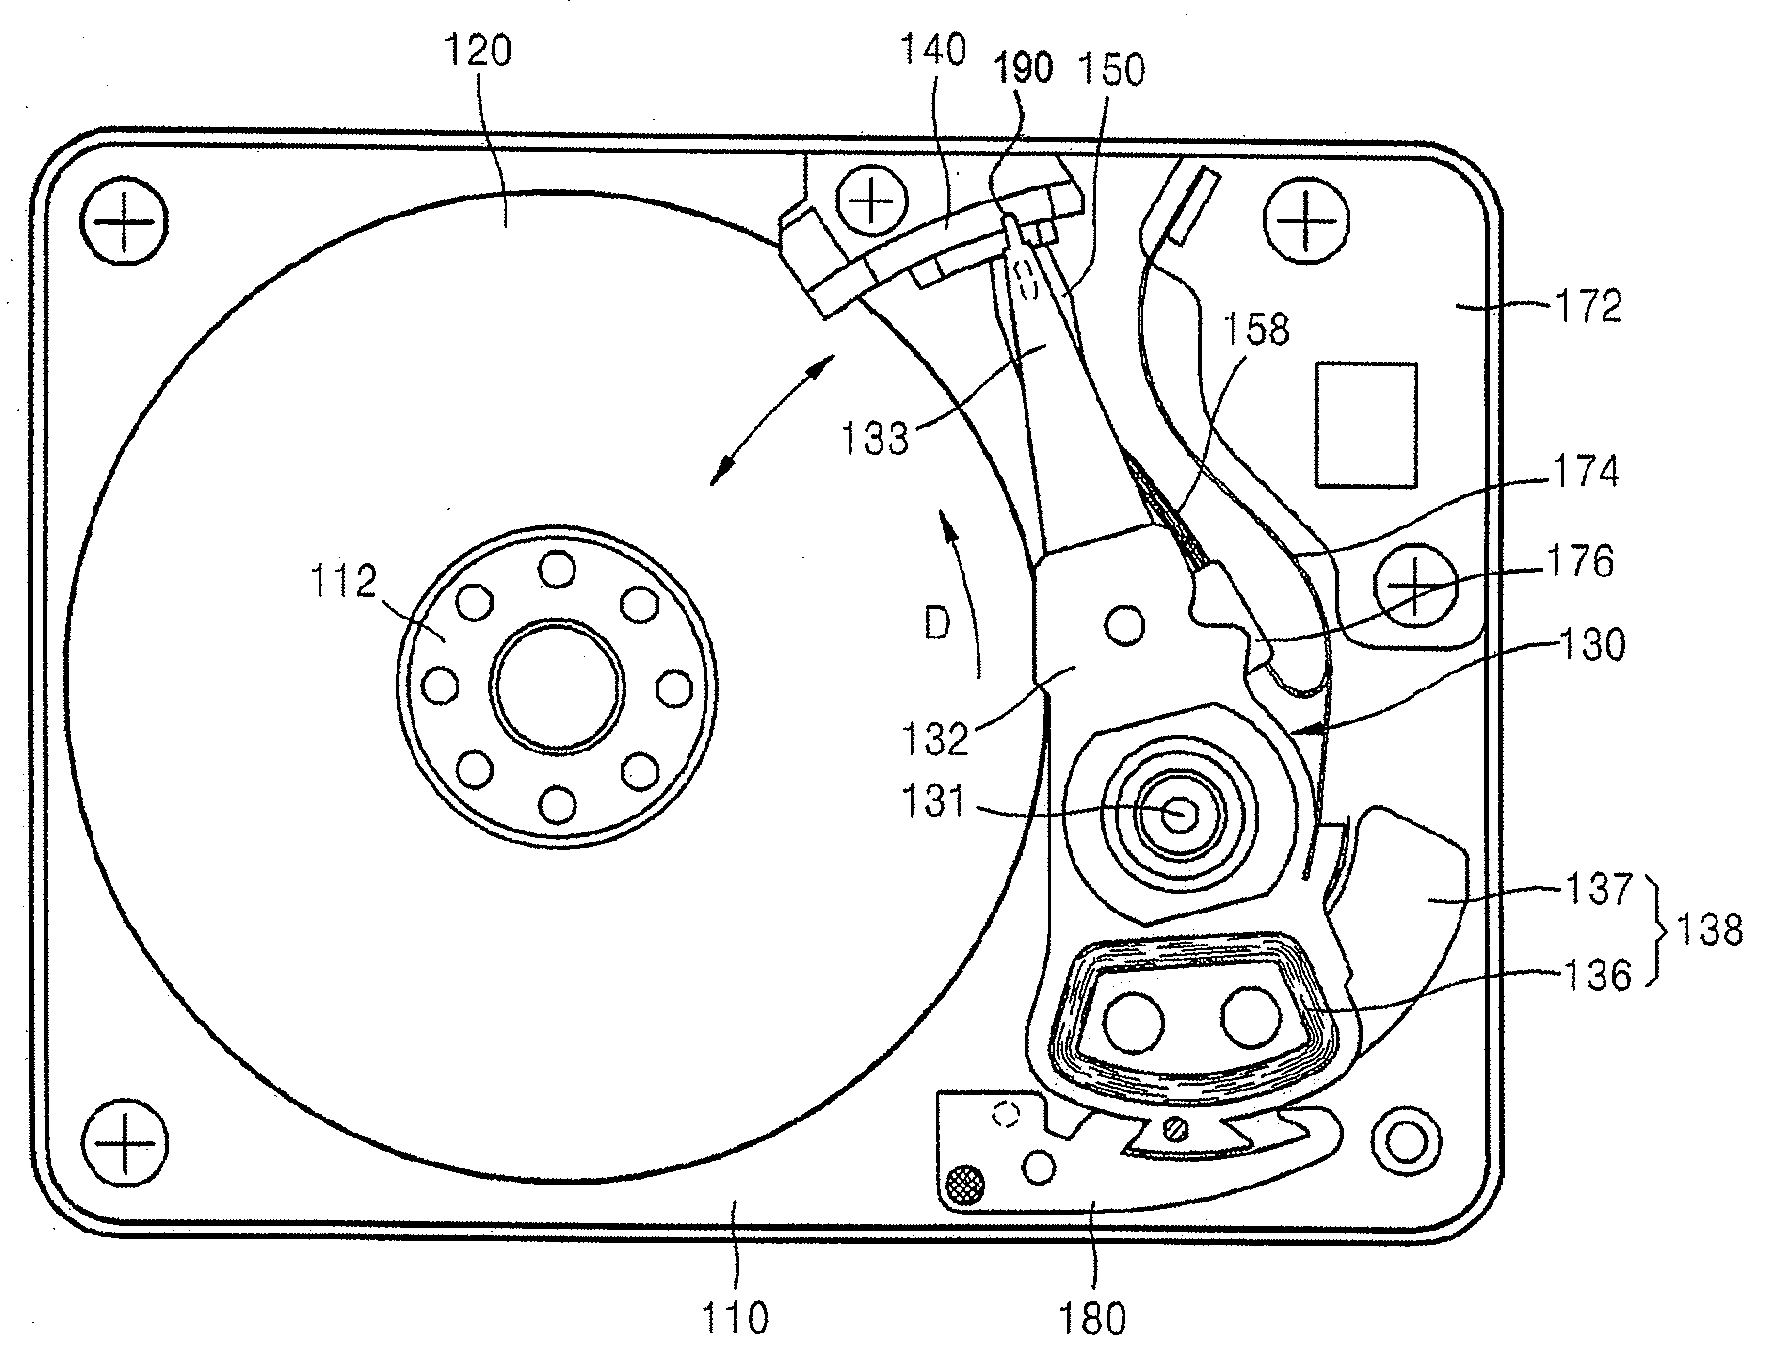 Head gimbal assembly of hard disk drive